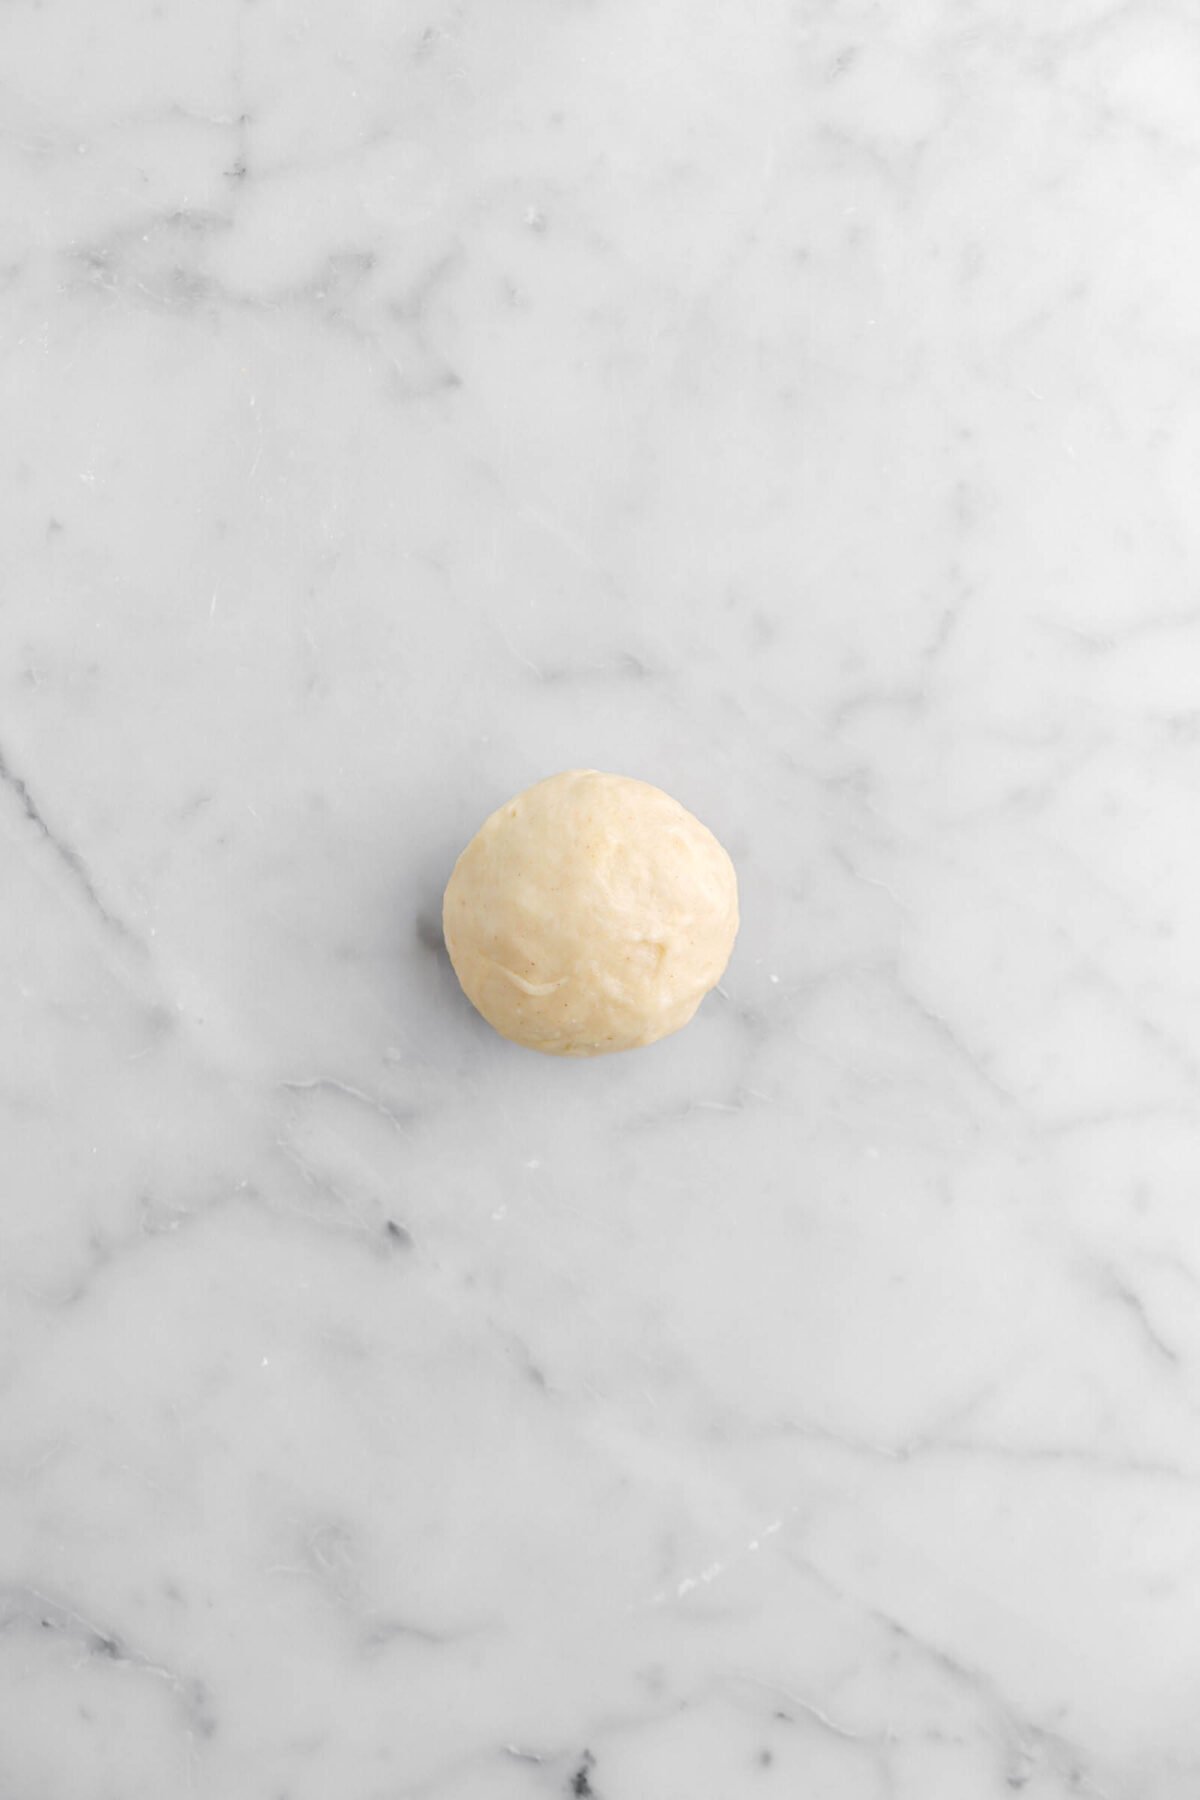 dough ball on marble surface